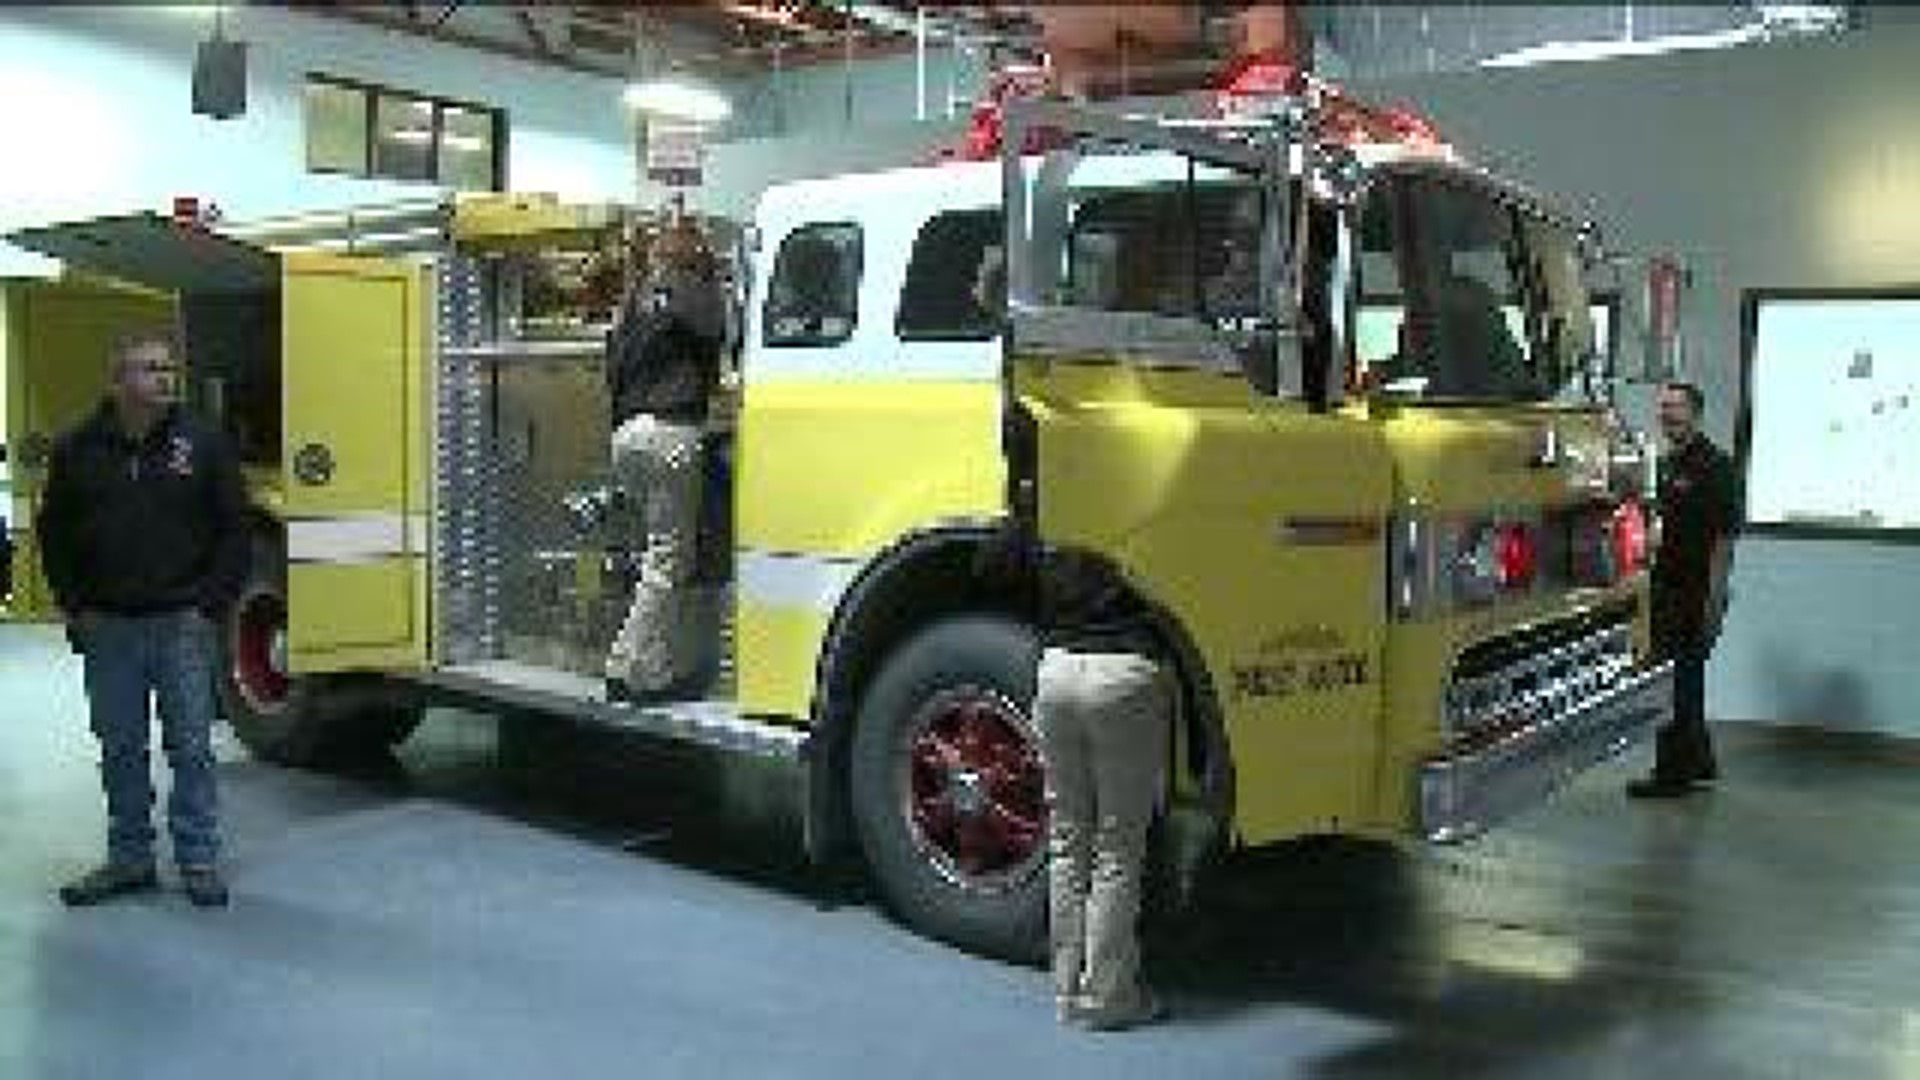 Fire Truck Donated to Teach Future First Responders